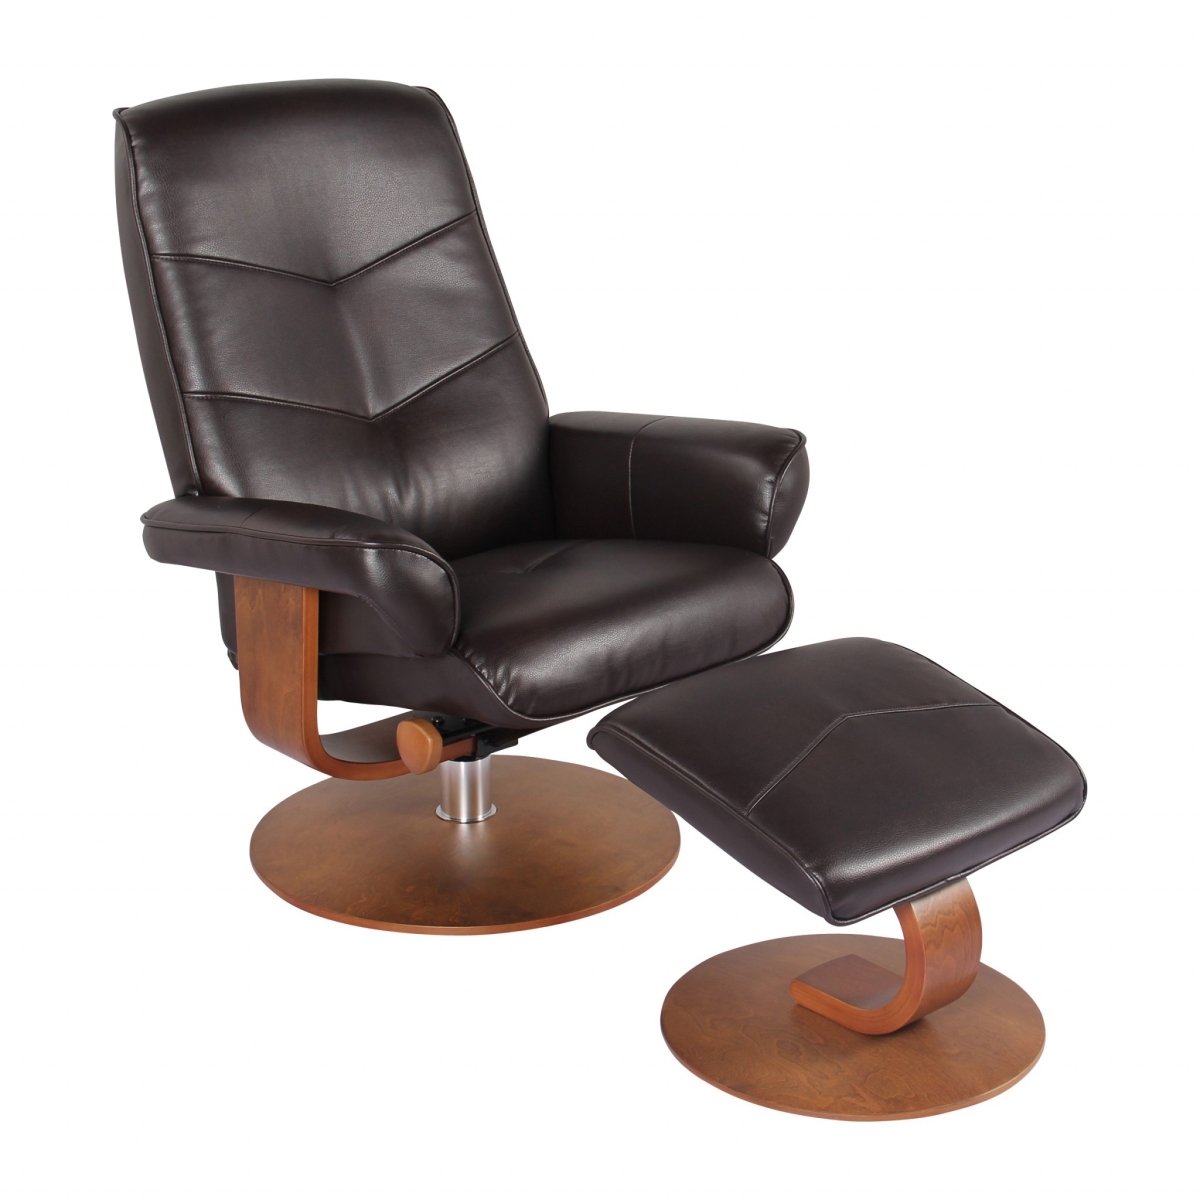 Home Roots 383051 Contemporary Swivel Recliner & Ottoman Set, Java Brown